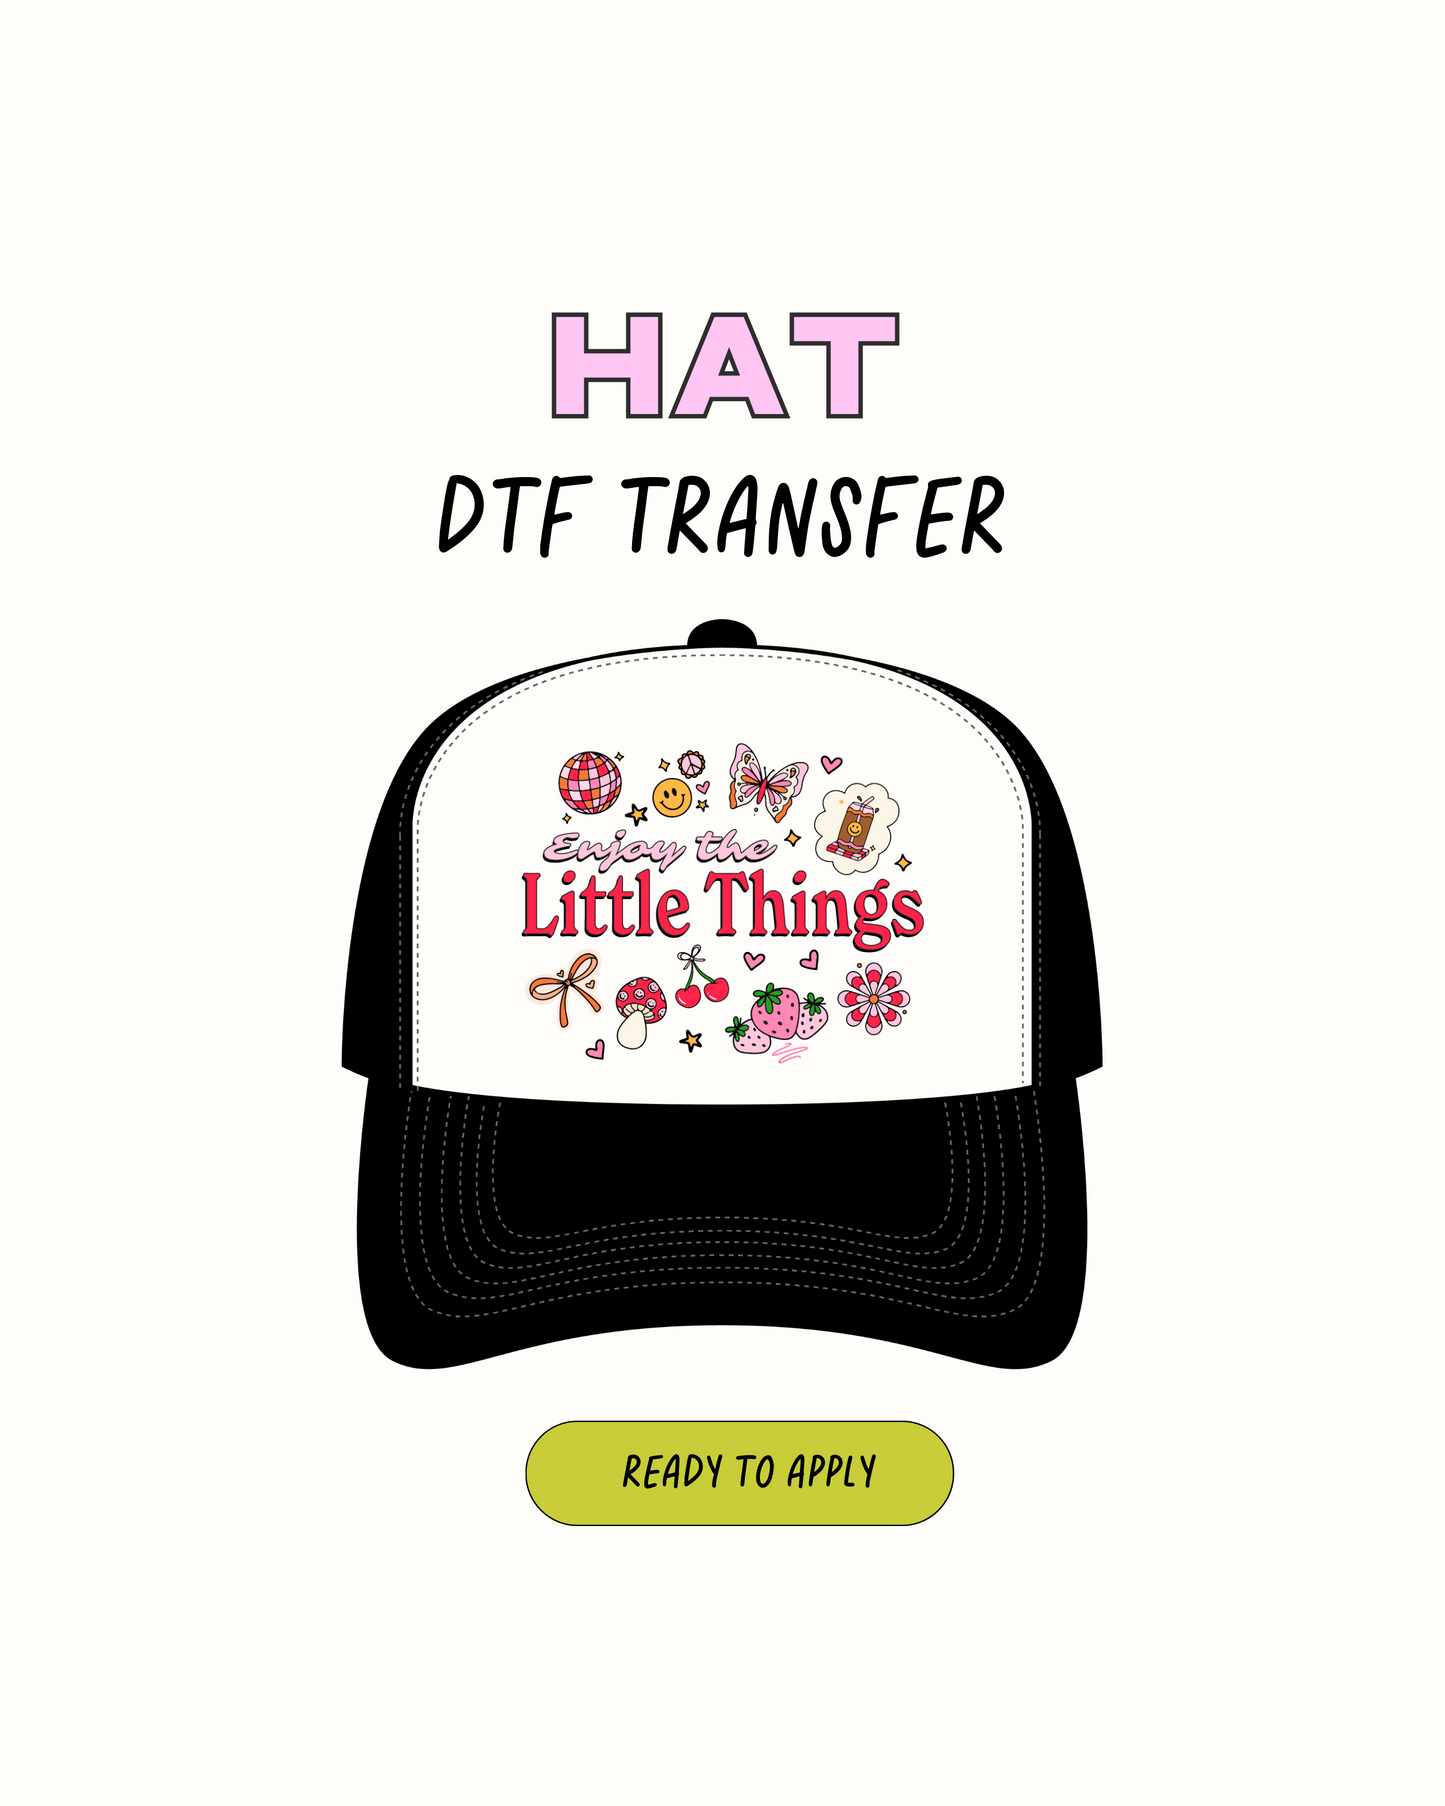 the little things - DTF Hat Transfers